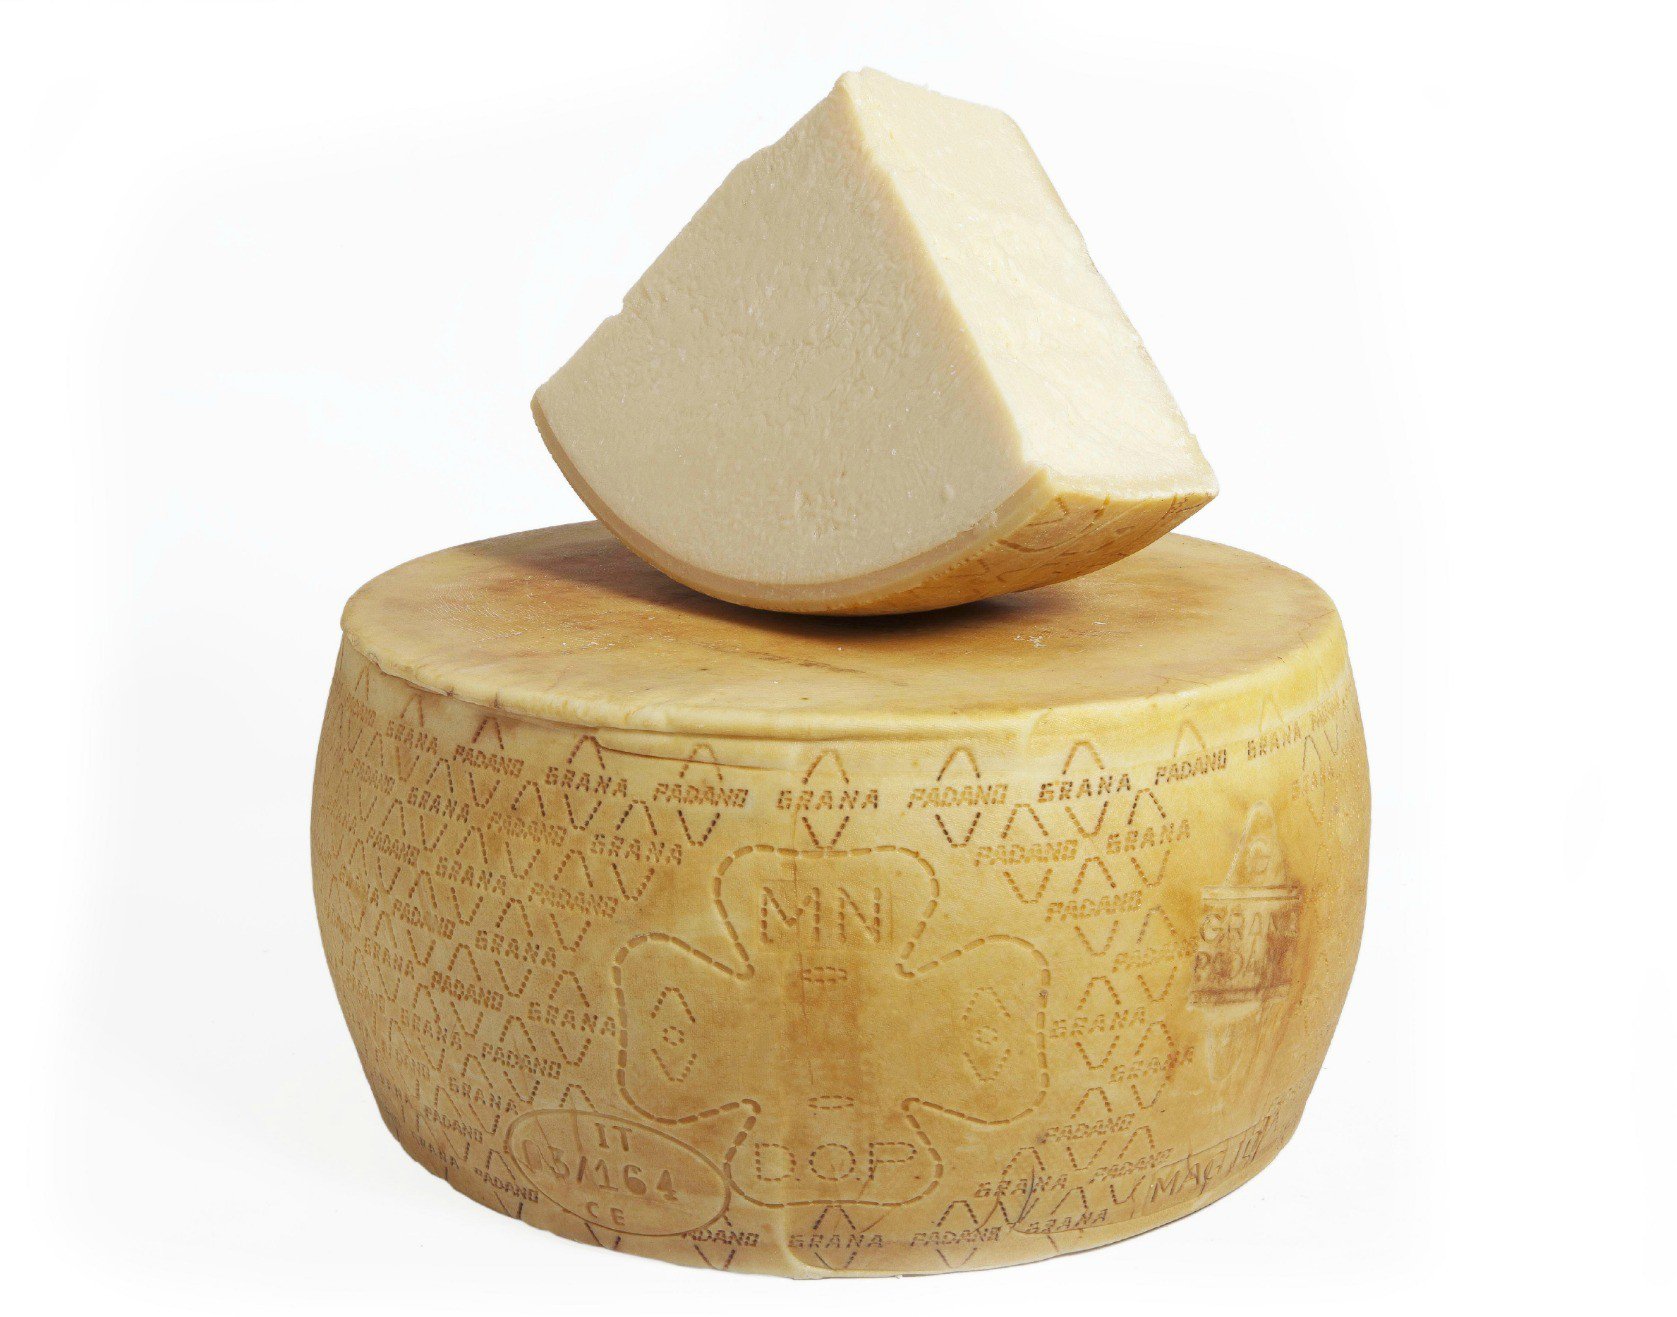 Agriform 9 lb. 15-16 Month Aged DOP Grana Padano Cheese Wedge